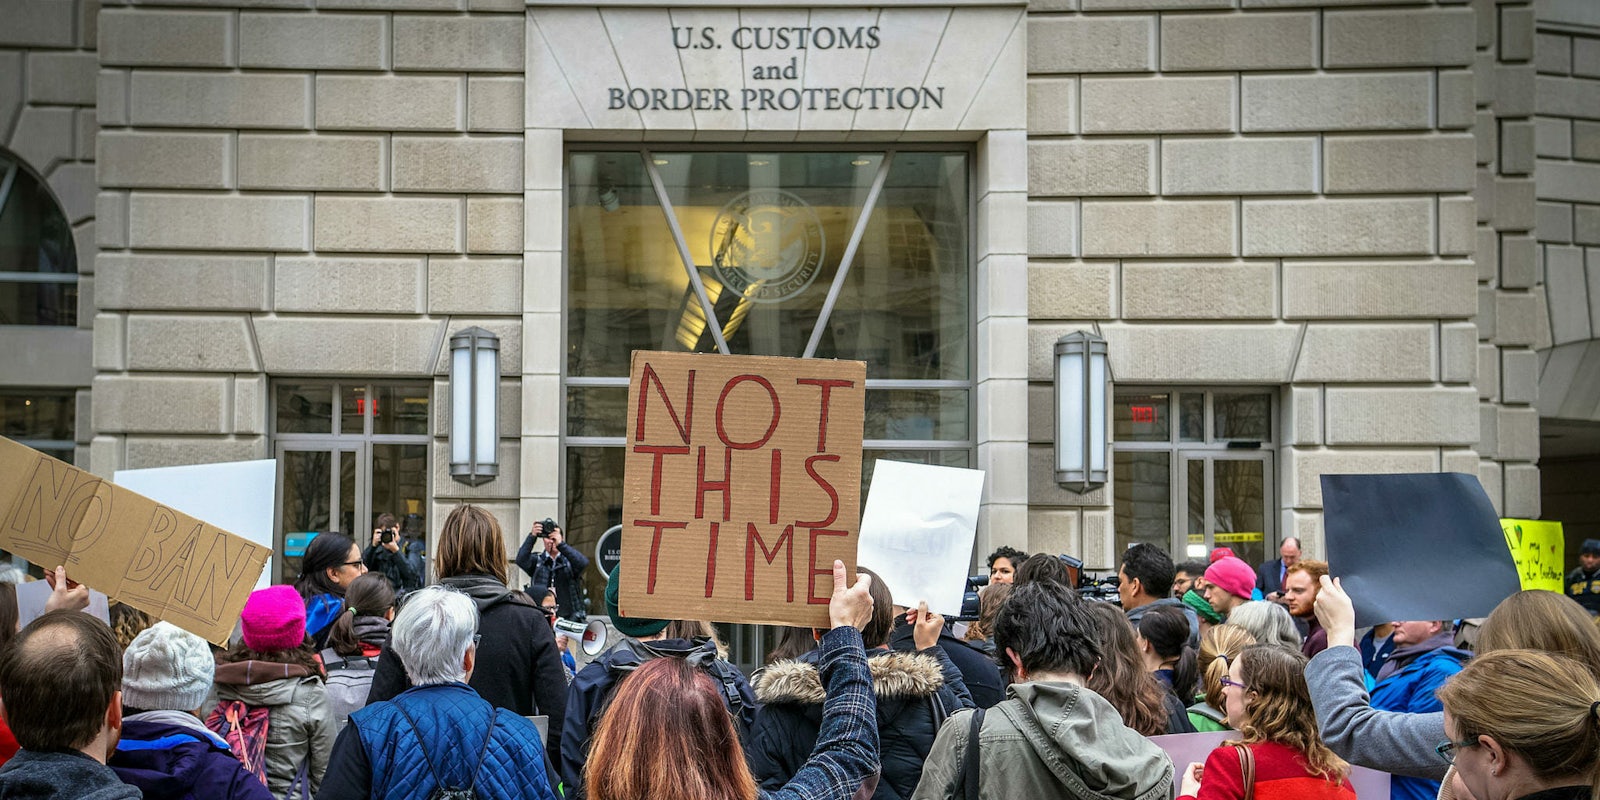 People protesting a U.S. Customs and Border Protection office.